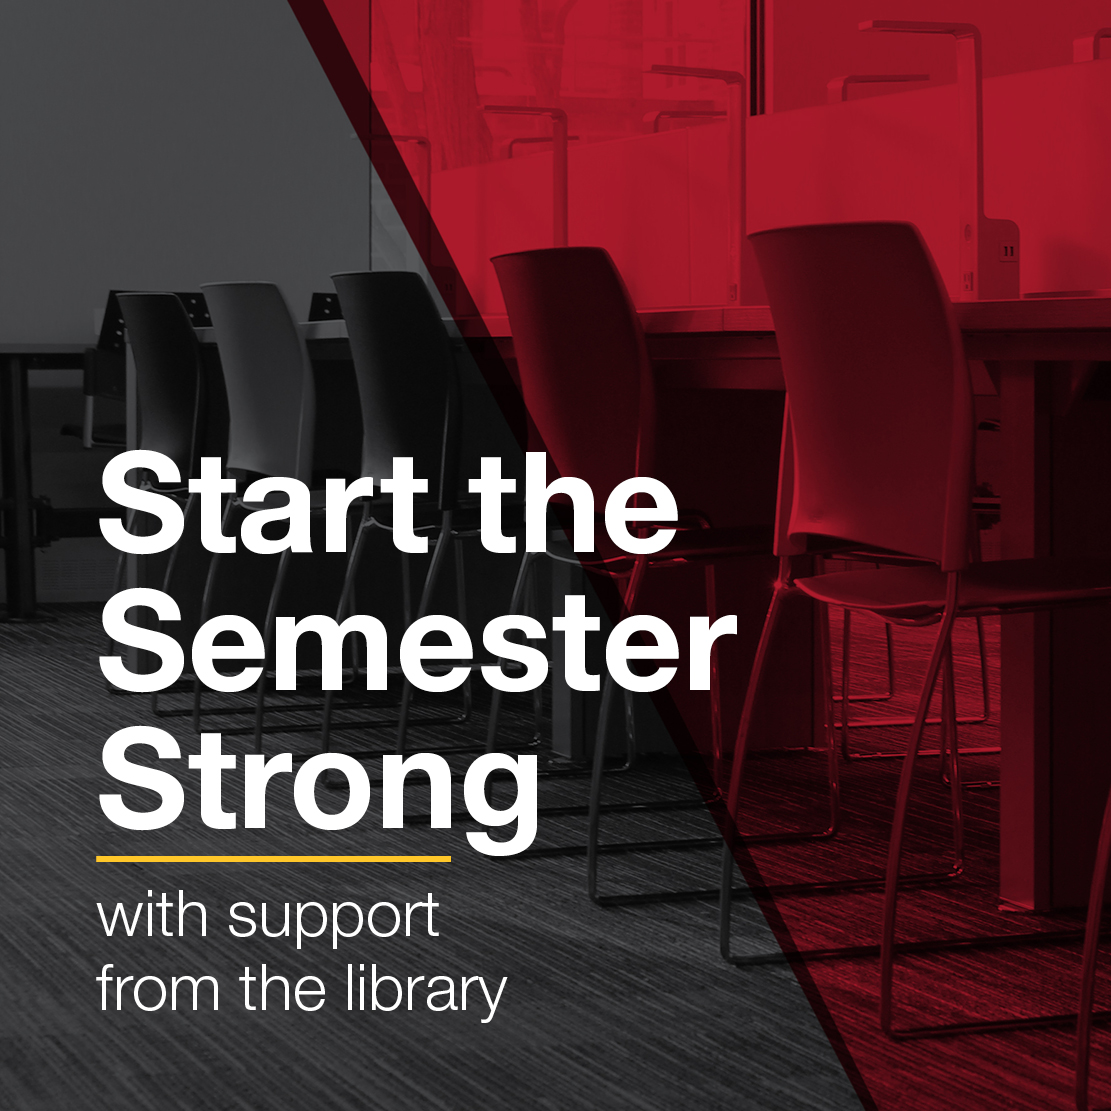 Text on graphic reads "Start the semester strong with support from the library." The photo behind the text is of chairs and long study table from the U of G library with a red and grey overlay.